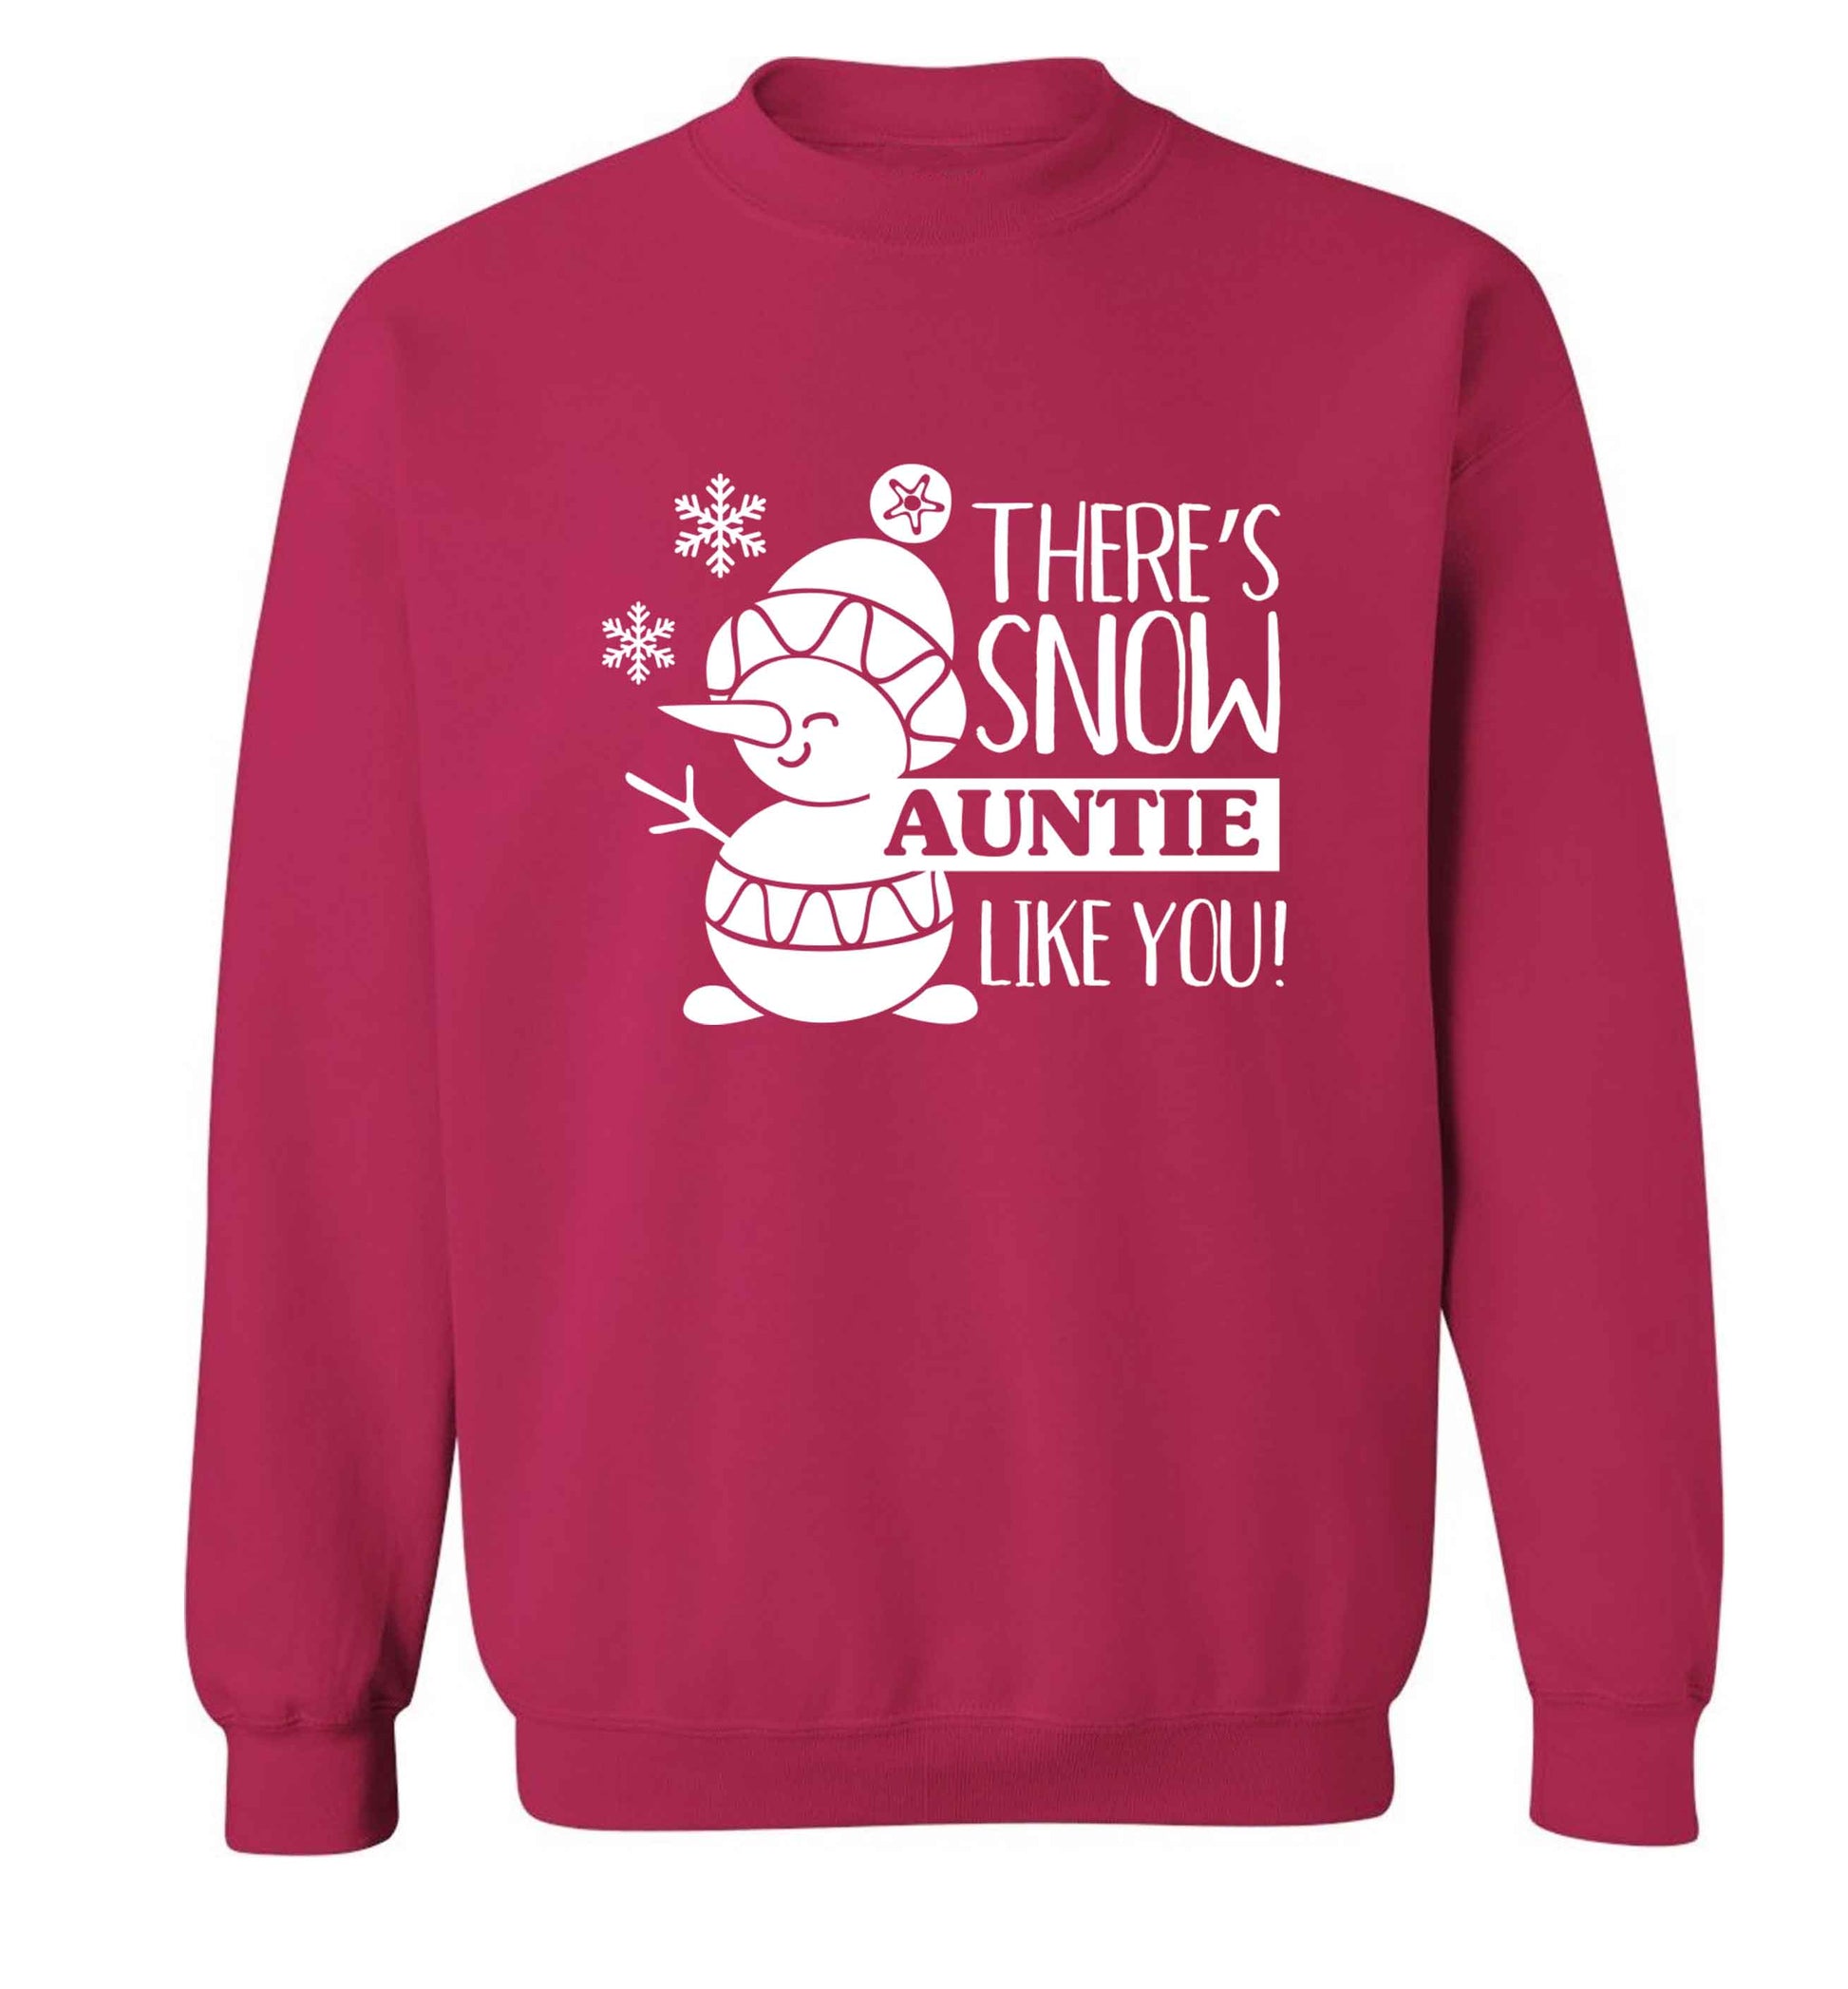 There's snow auntie like you adult's unisex pink sweater 2XL